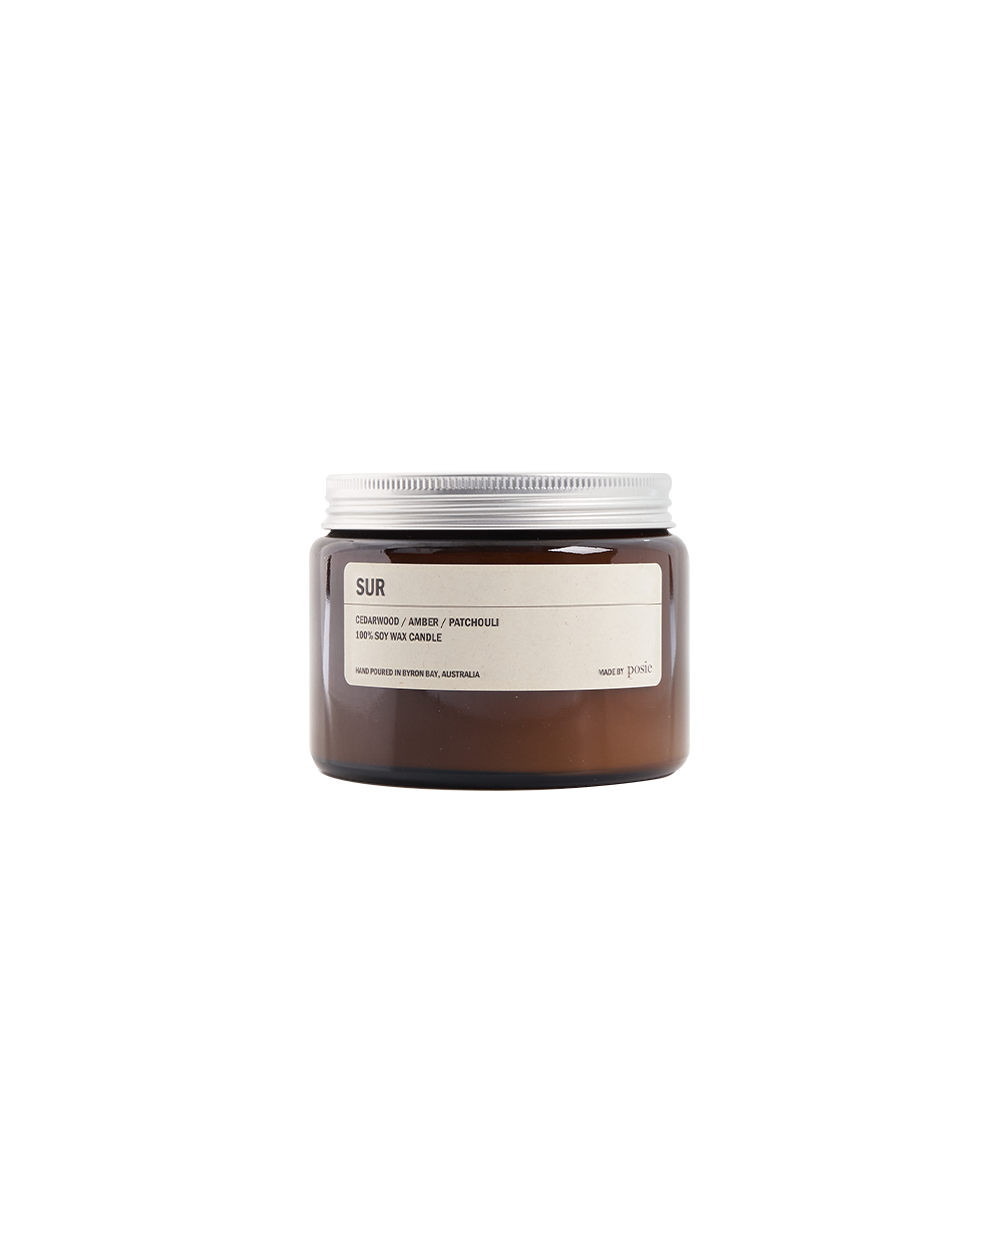 500g Amber Jay Soy Candle - SUR